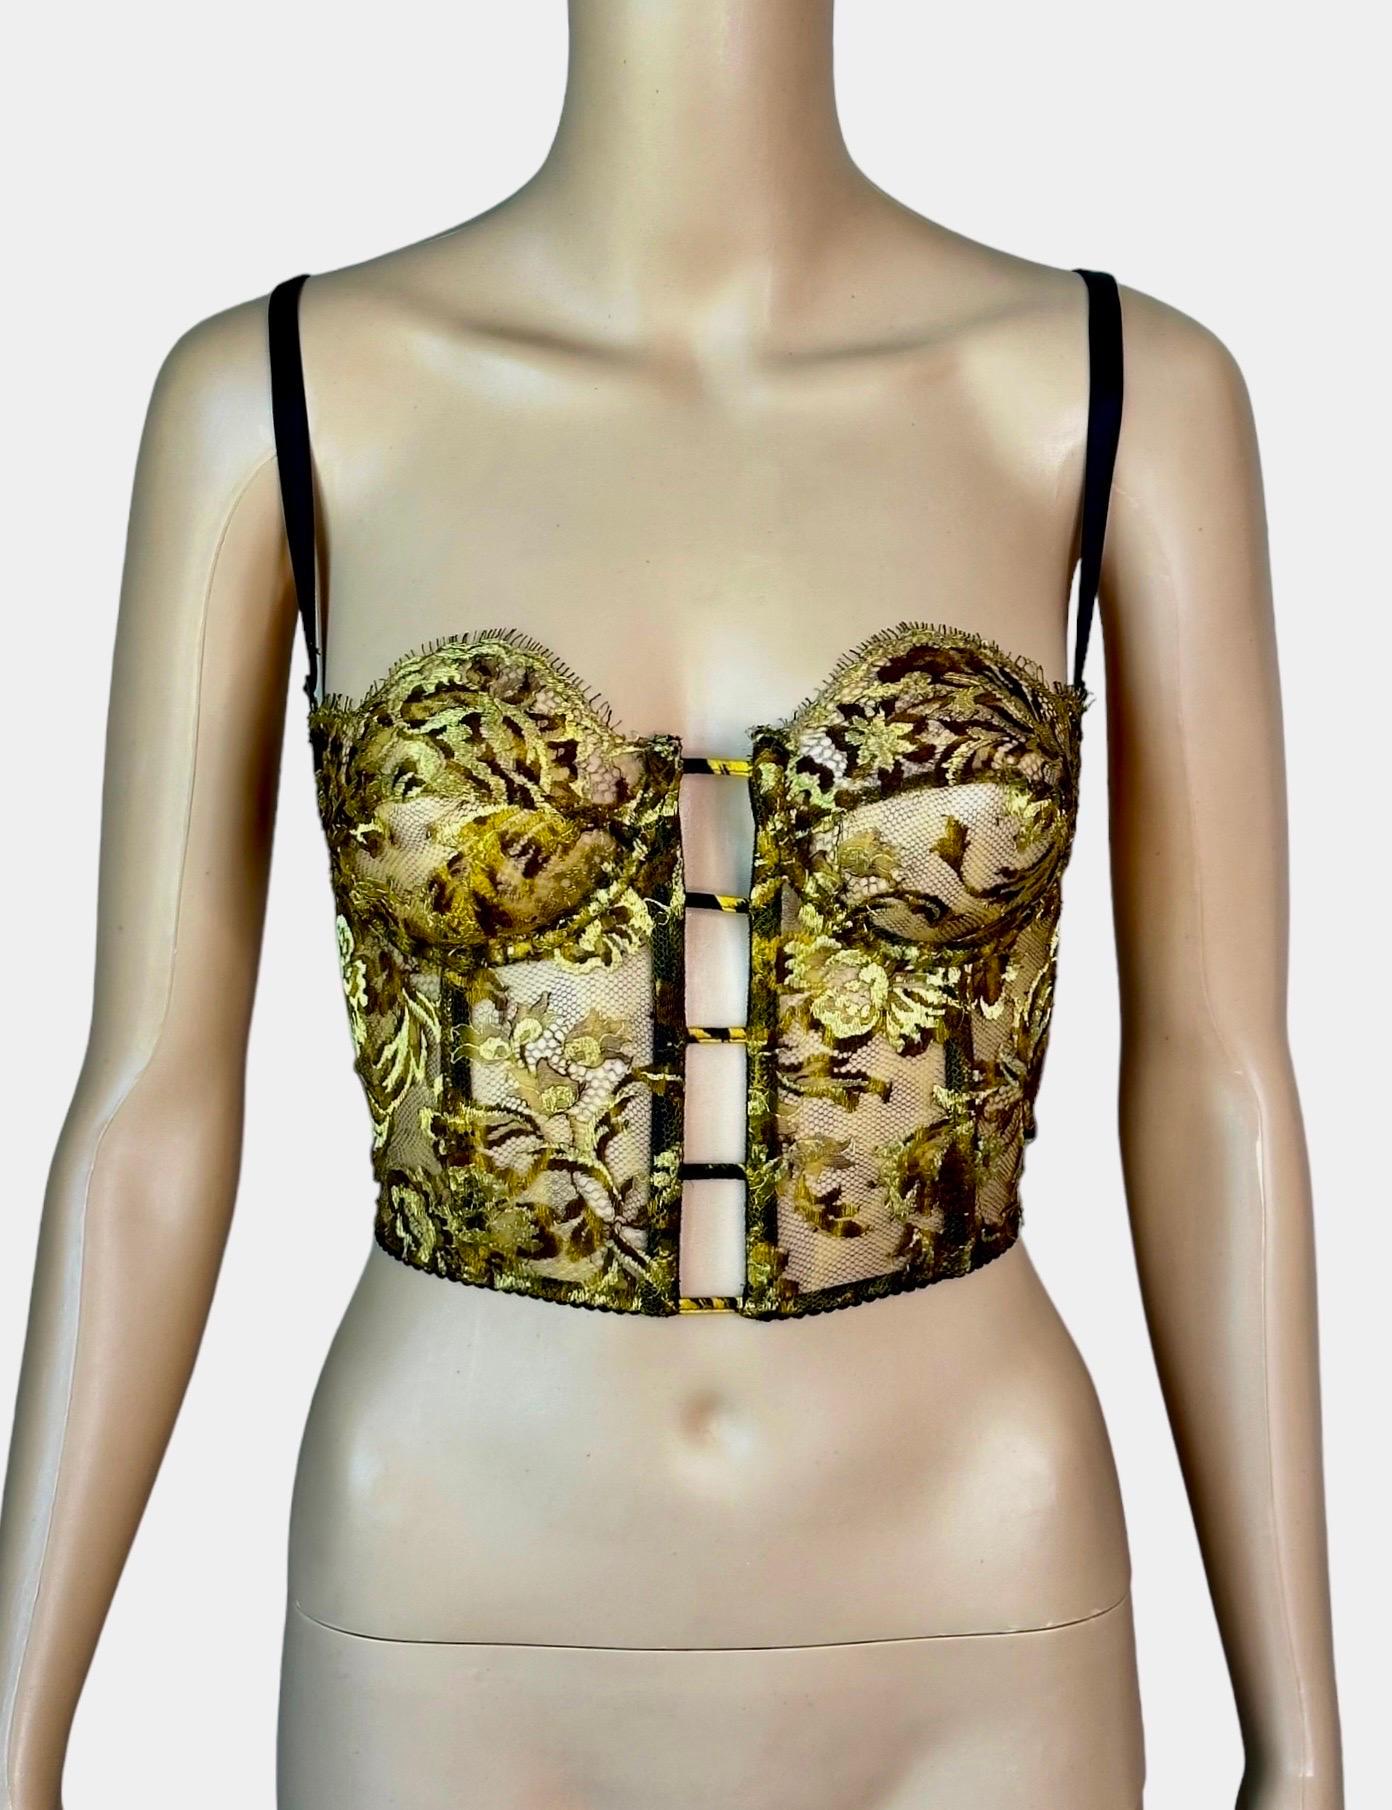 Gianni Versace S/S 1992 Unworn Sheer Gold Embroidered Lace Bustier Bra Crop Top  For Sale 5